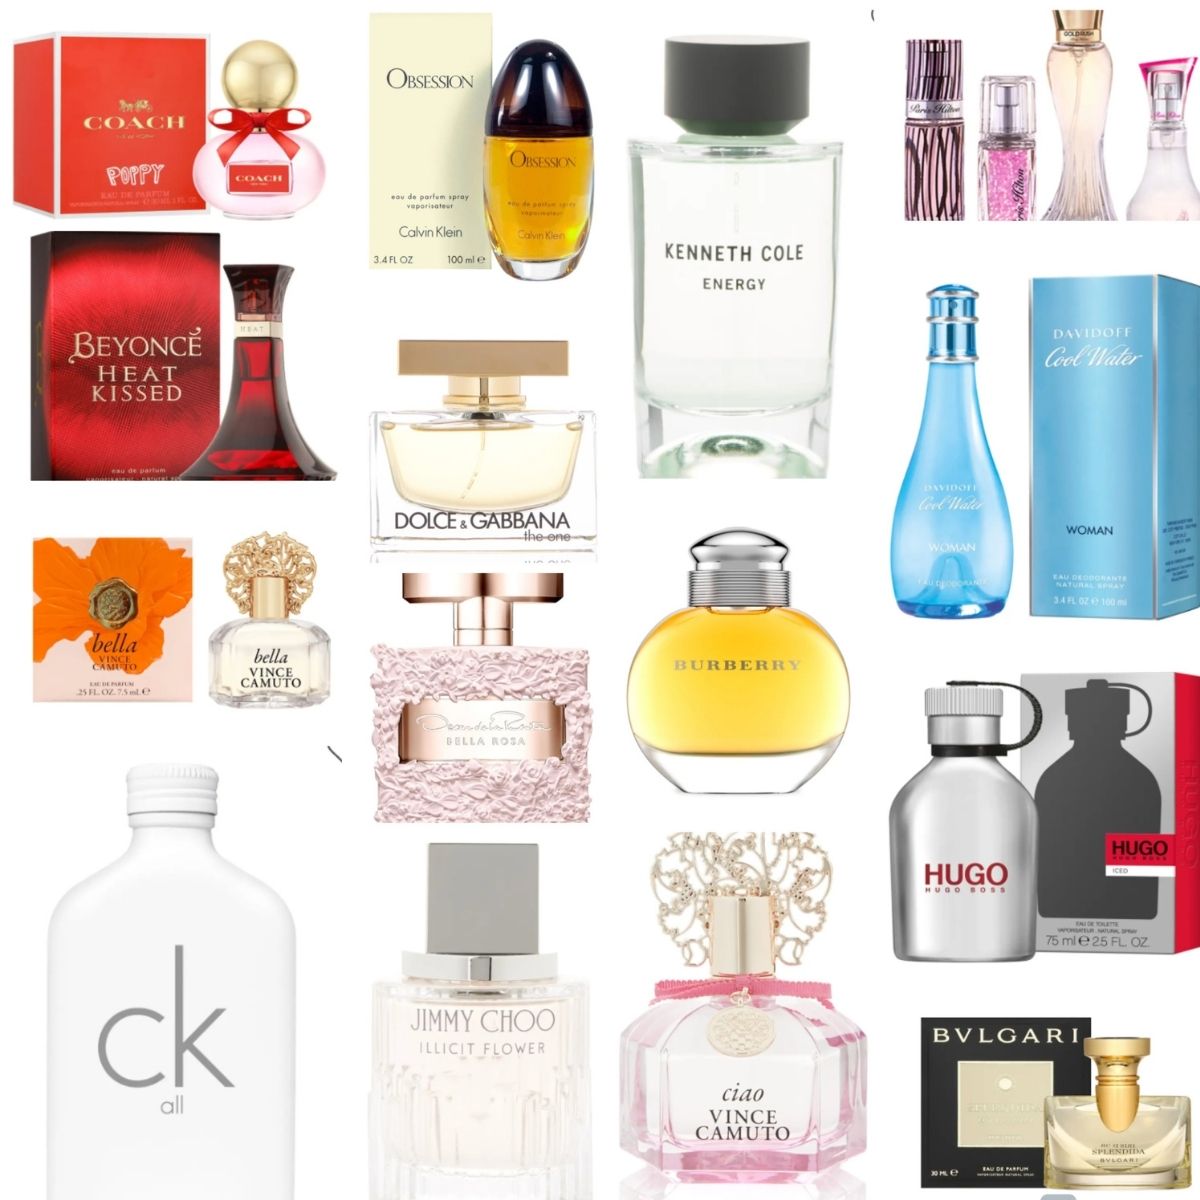 Up to 60% off on perfumes at Nordstrom Rack | Smart Savers